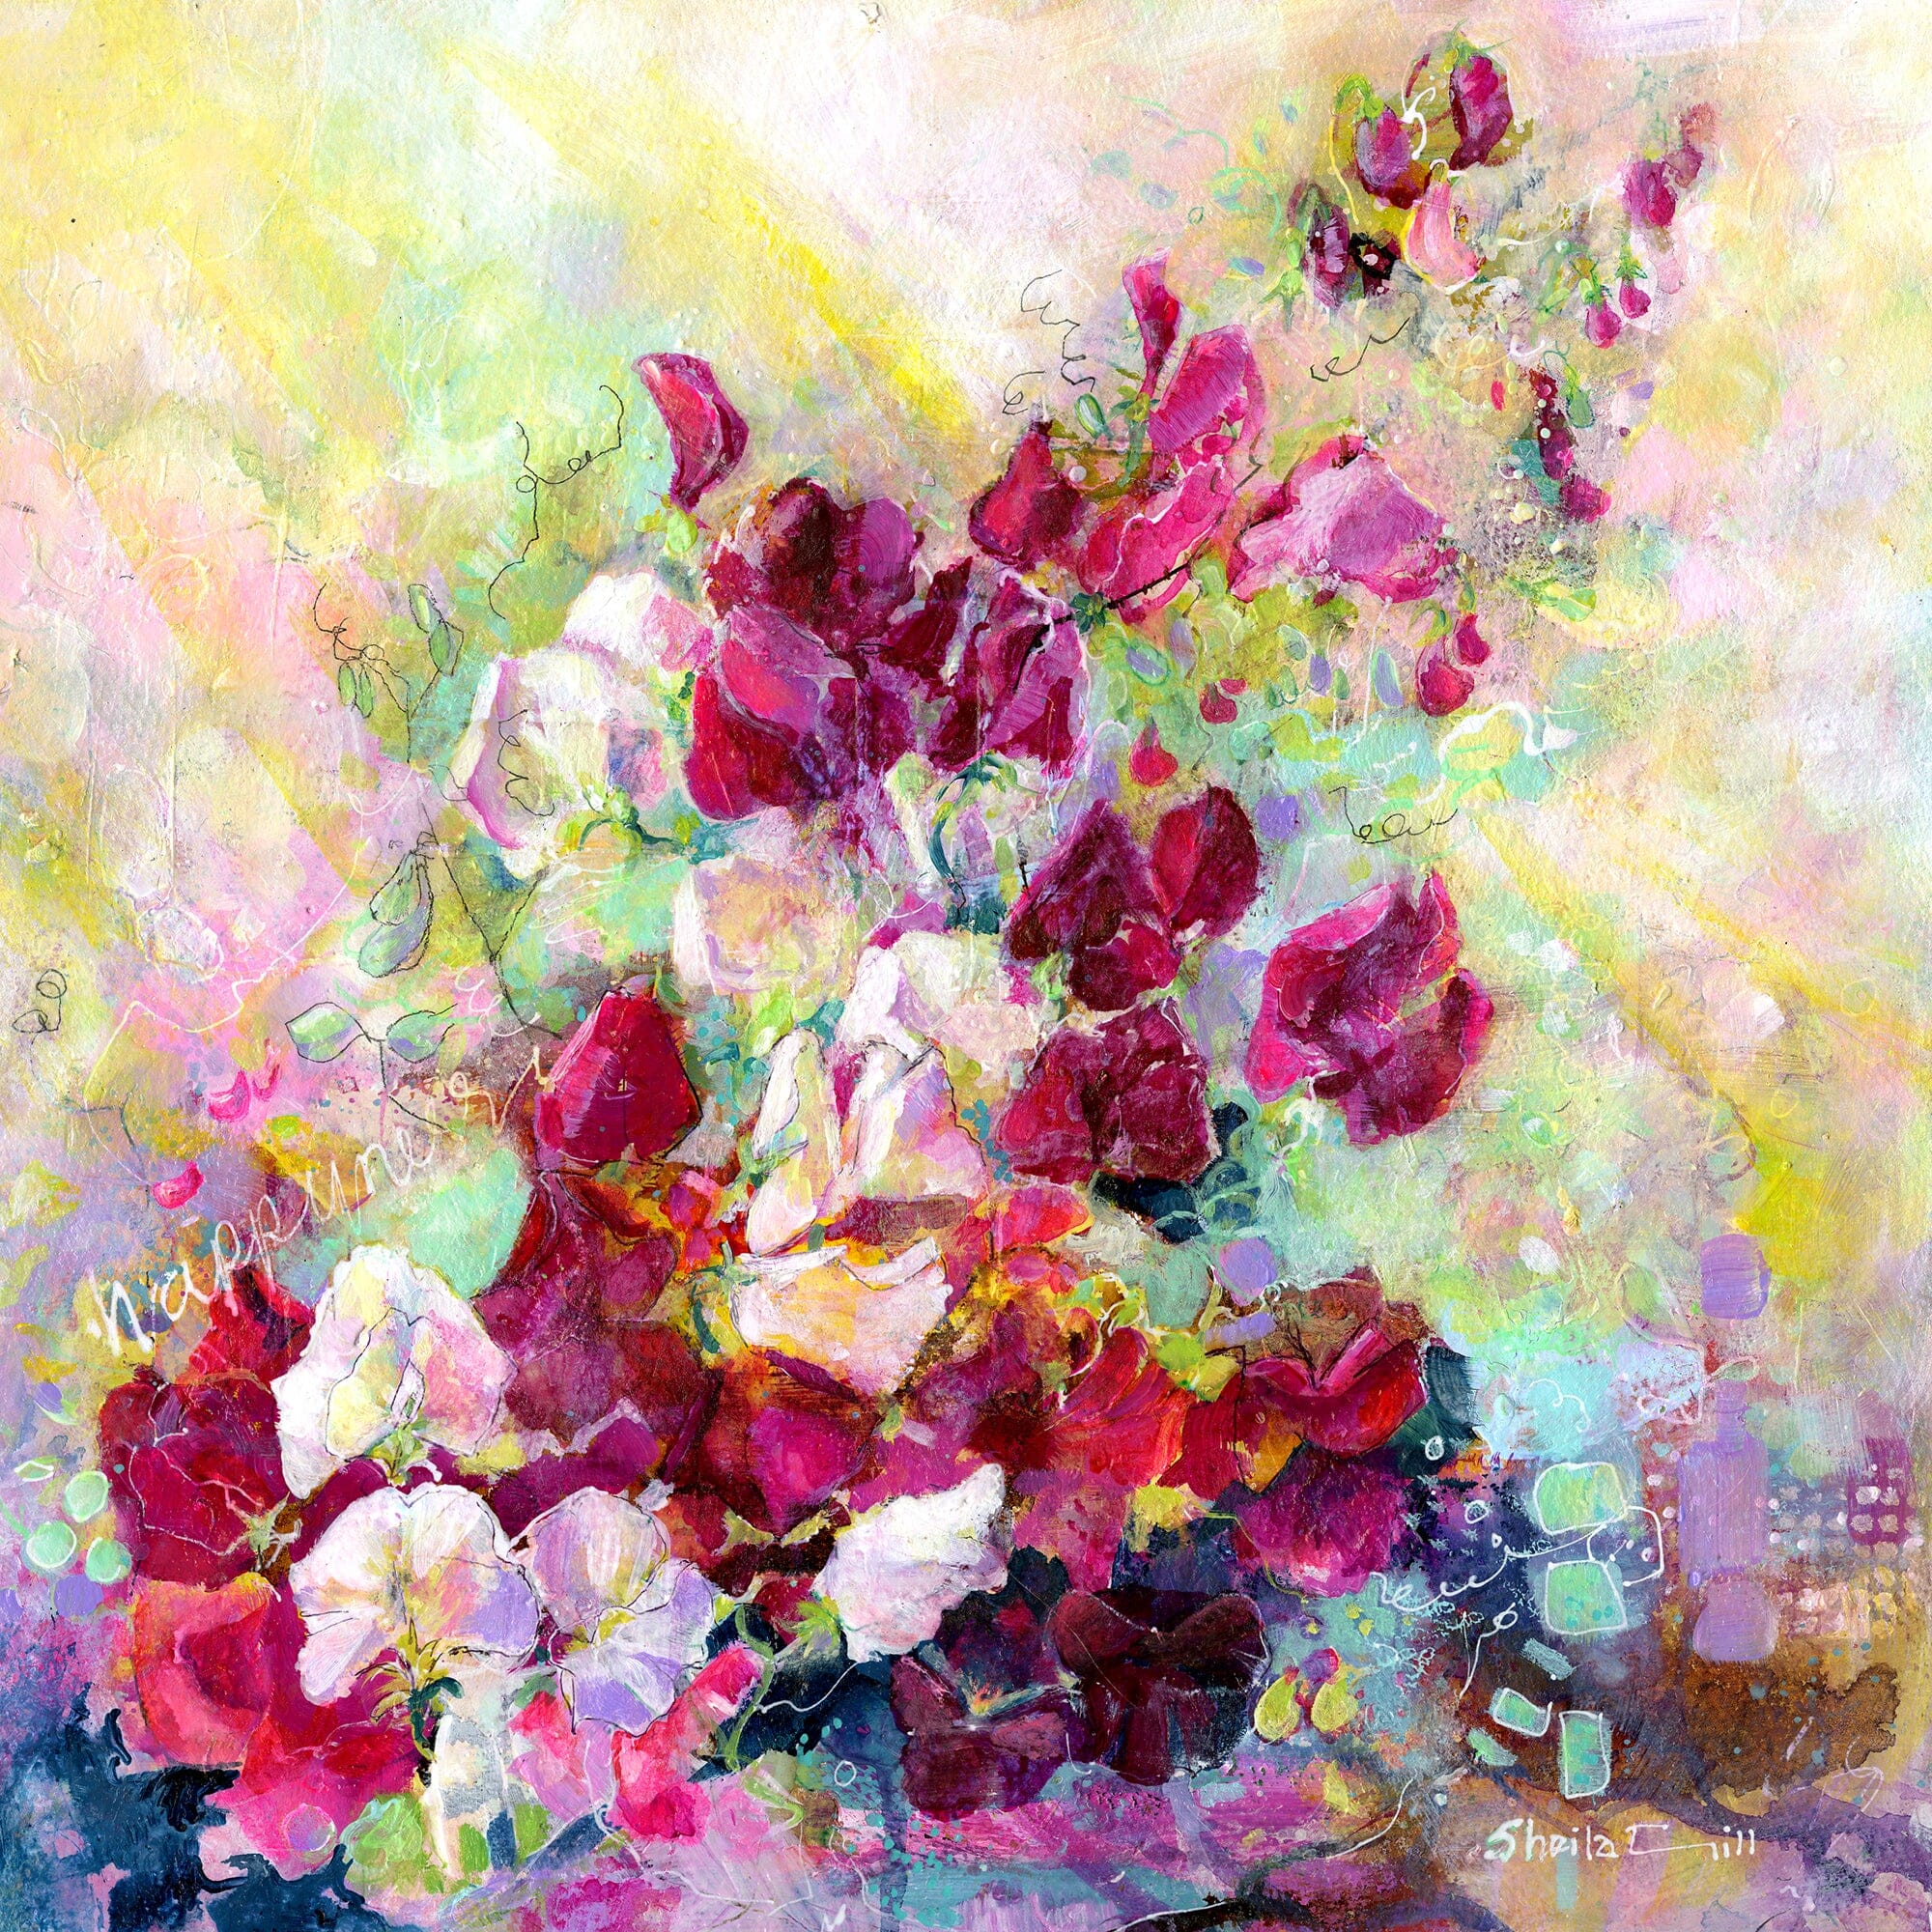 Sweet Peas - Flower Art Print semi abstract watercolour by artist Sheila Gill home decoration
